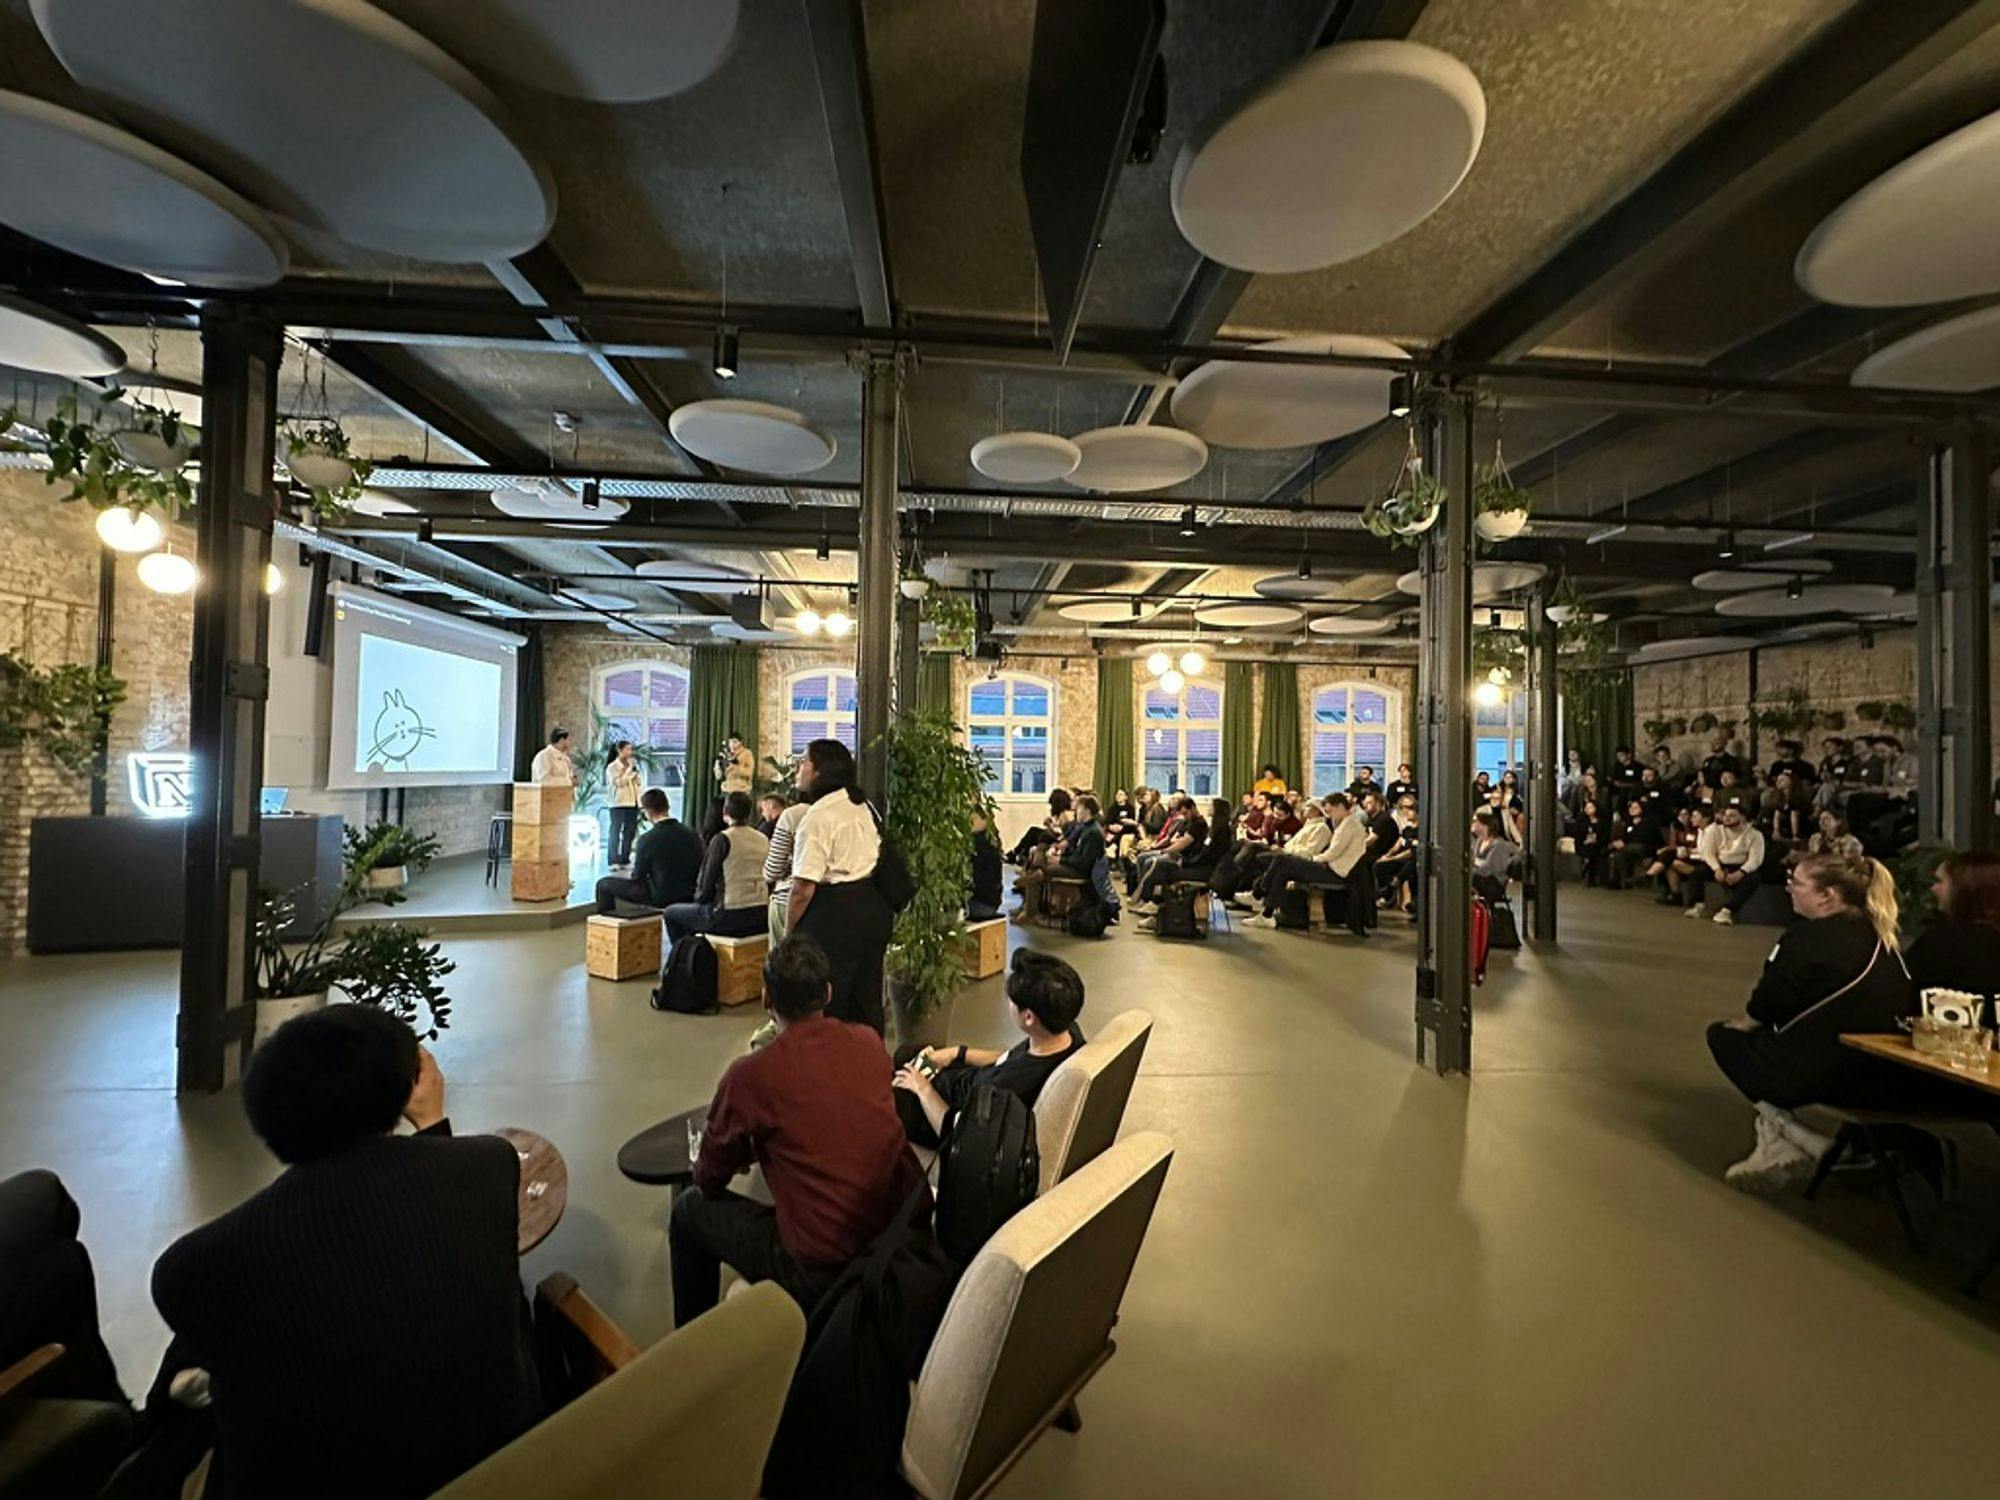 At Berlin, I gave a talk to 250 Notion community members about the power of Notion and upcoming features!